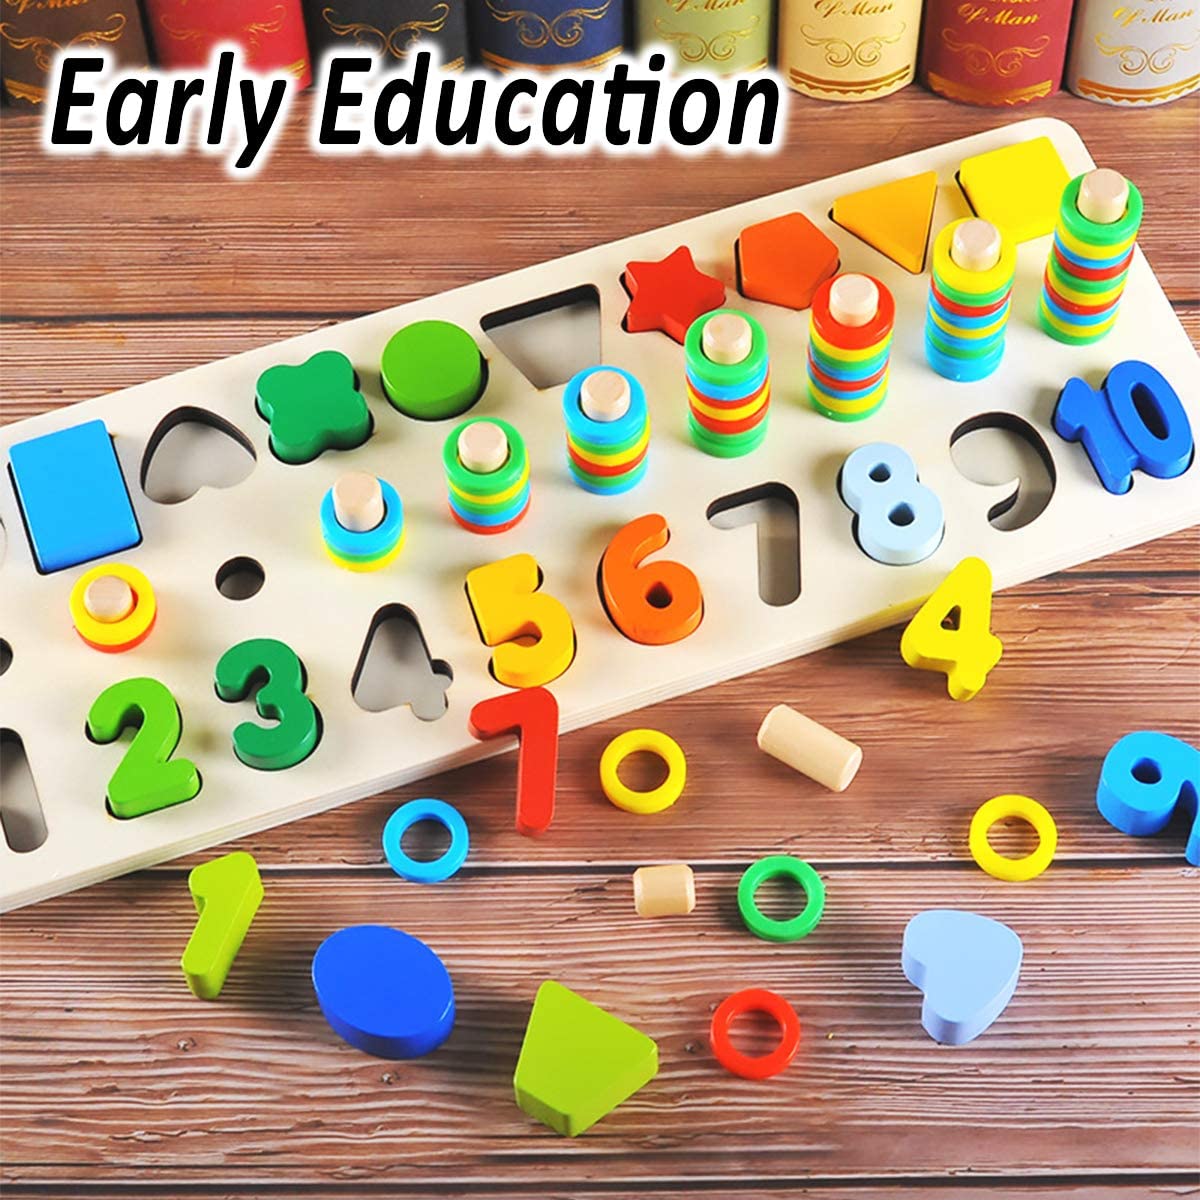 Educational Montessori Toys for Toddlers - Wooden Puzzles Blocks Number Stacking Best Preschool Learning Activities Shape sorter Math Game Baby Kids Girls Boys Ages 3 4 5 Years Old | MTTS158